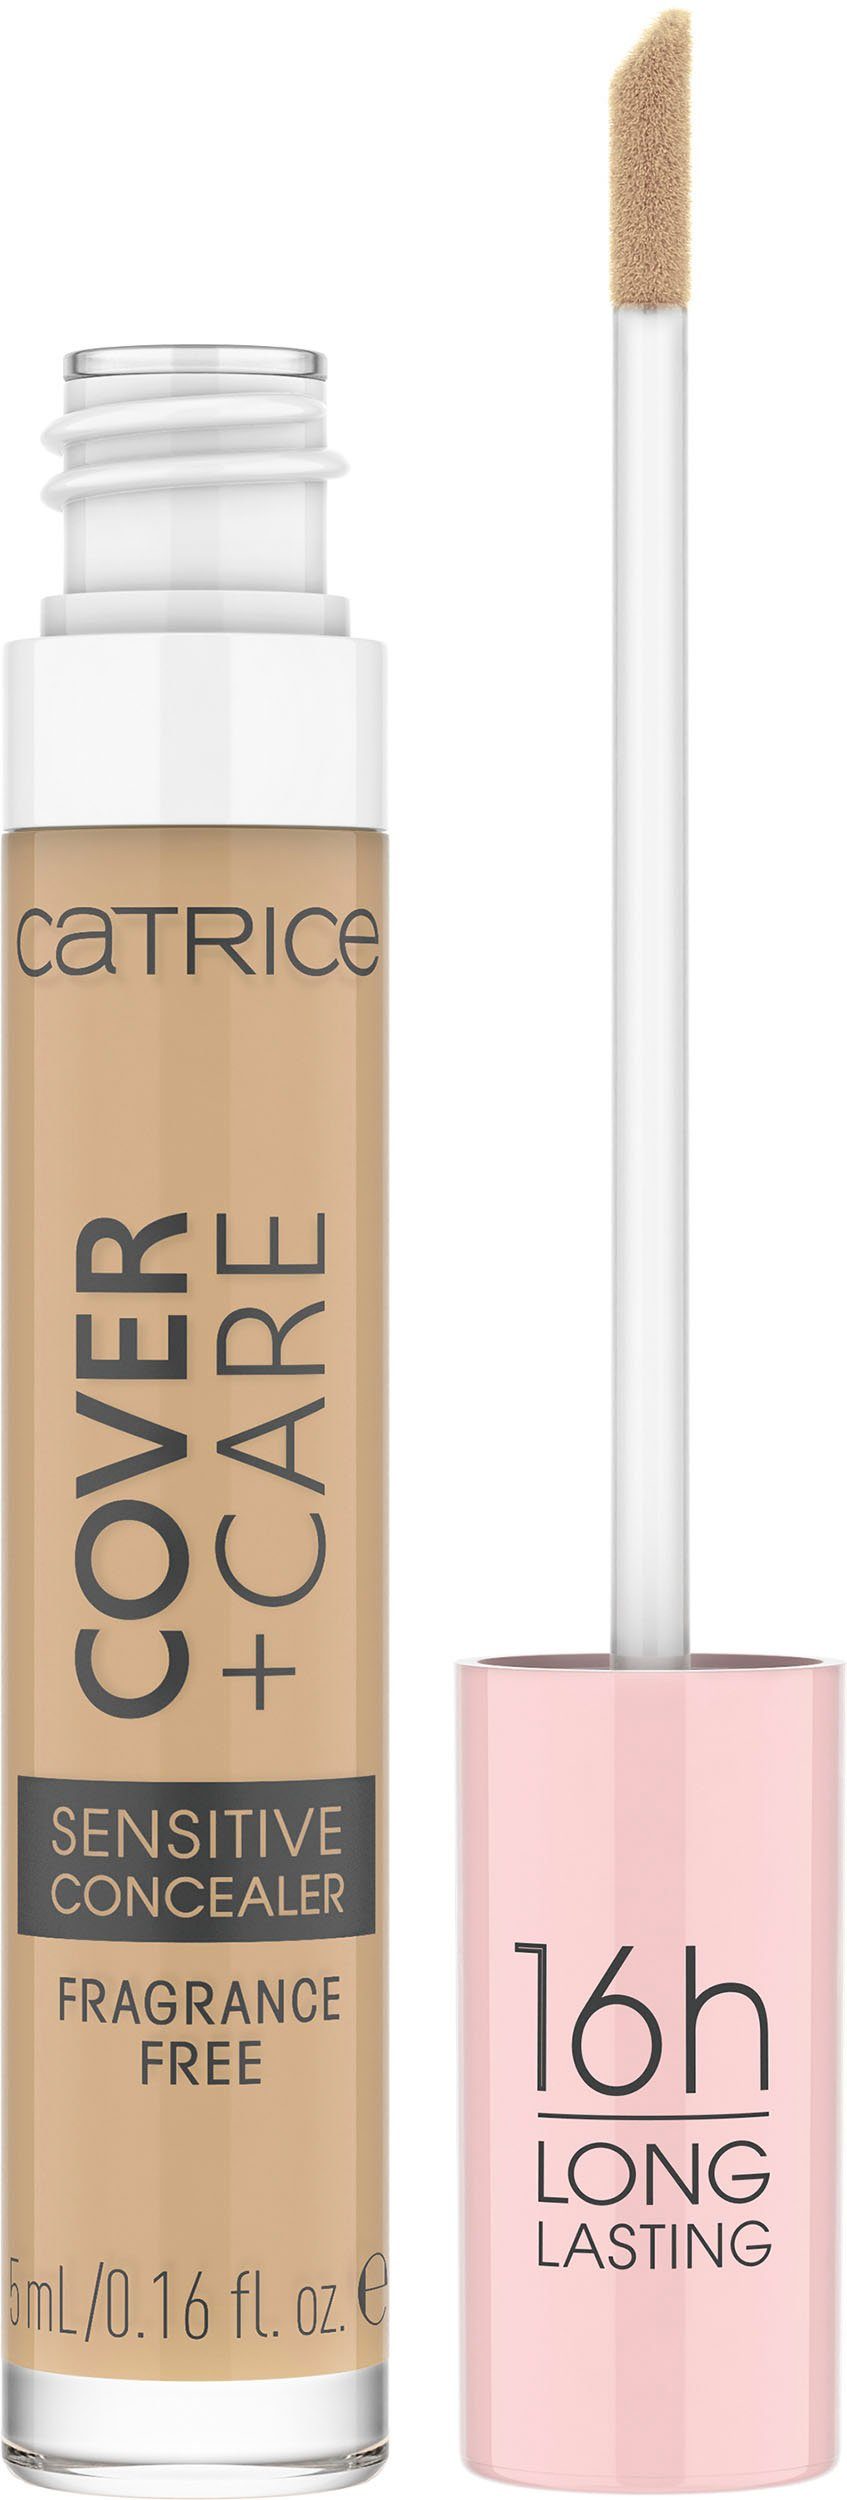 Concealer Cover Care Catrice Catrice Sensitive 3-tlg. Concealer, 030N nude +